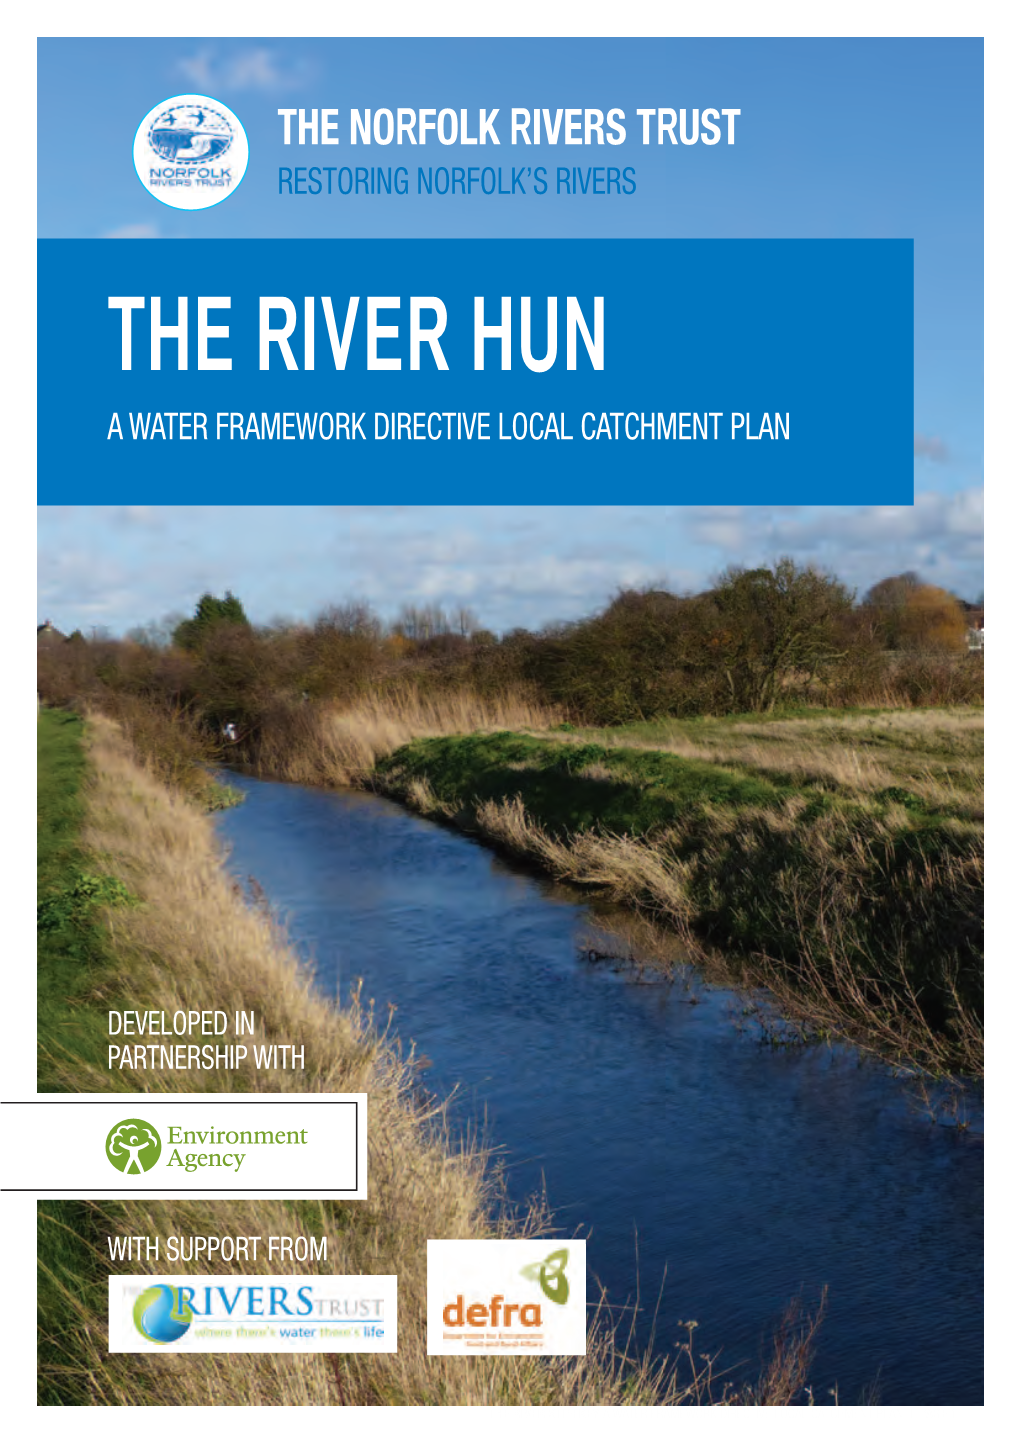 The River Hun a Water Framework Directive Local Catchment Plan